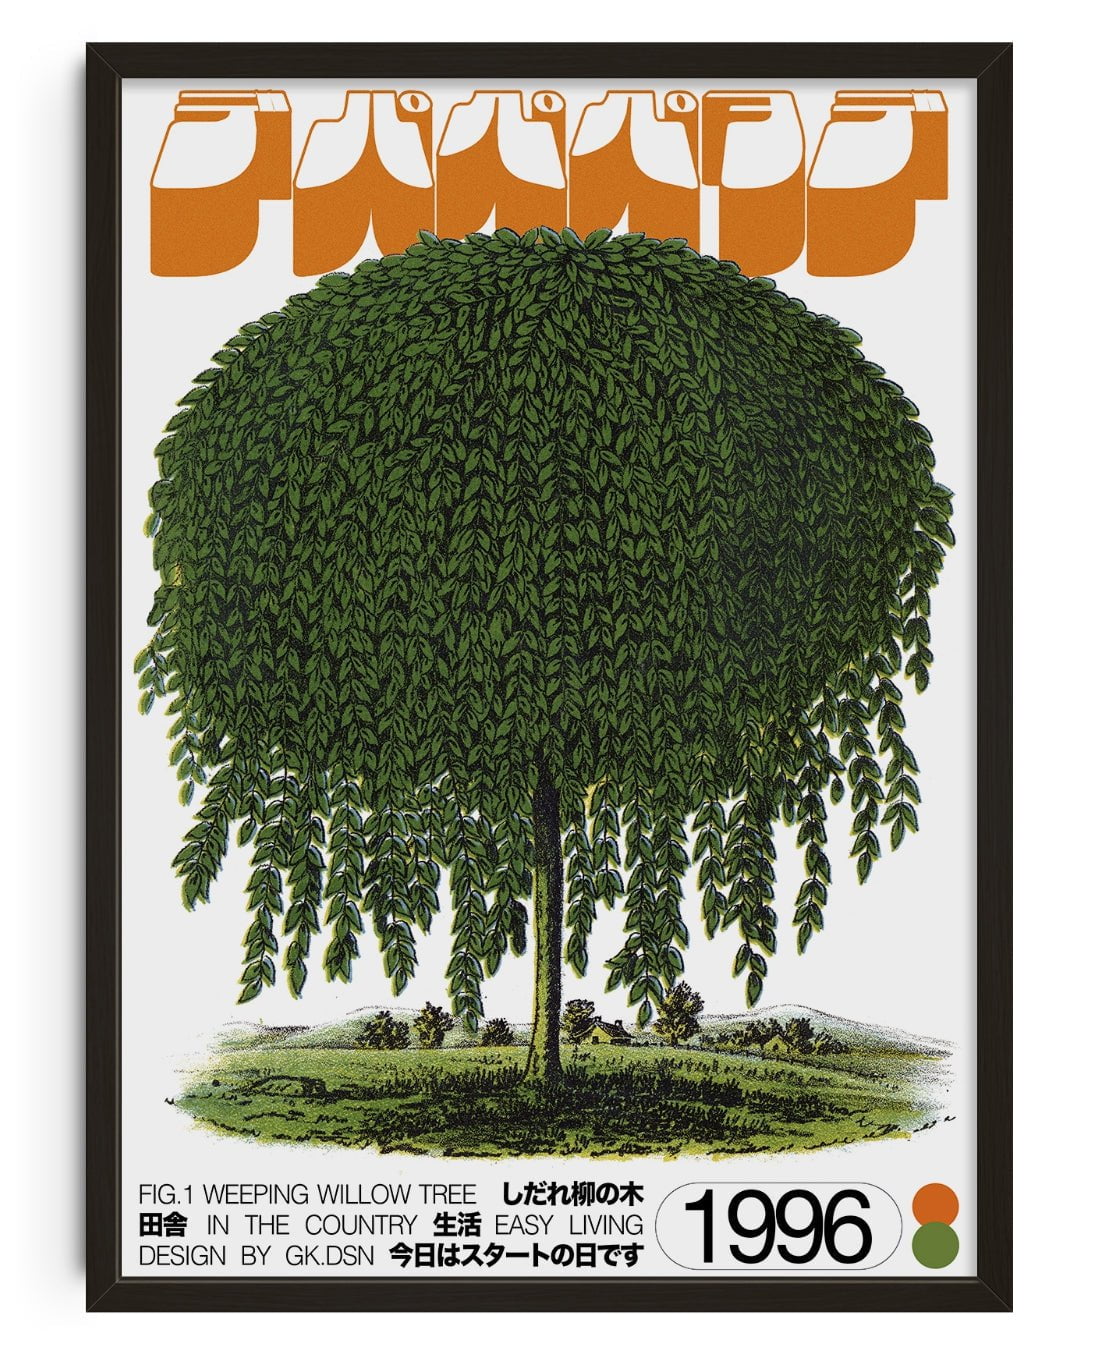 11.7x16.5" (A3) Willow Tree - UNFRAMED contemporary wall art print by George Kempster - sold by DROOL